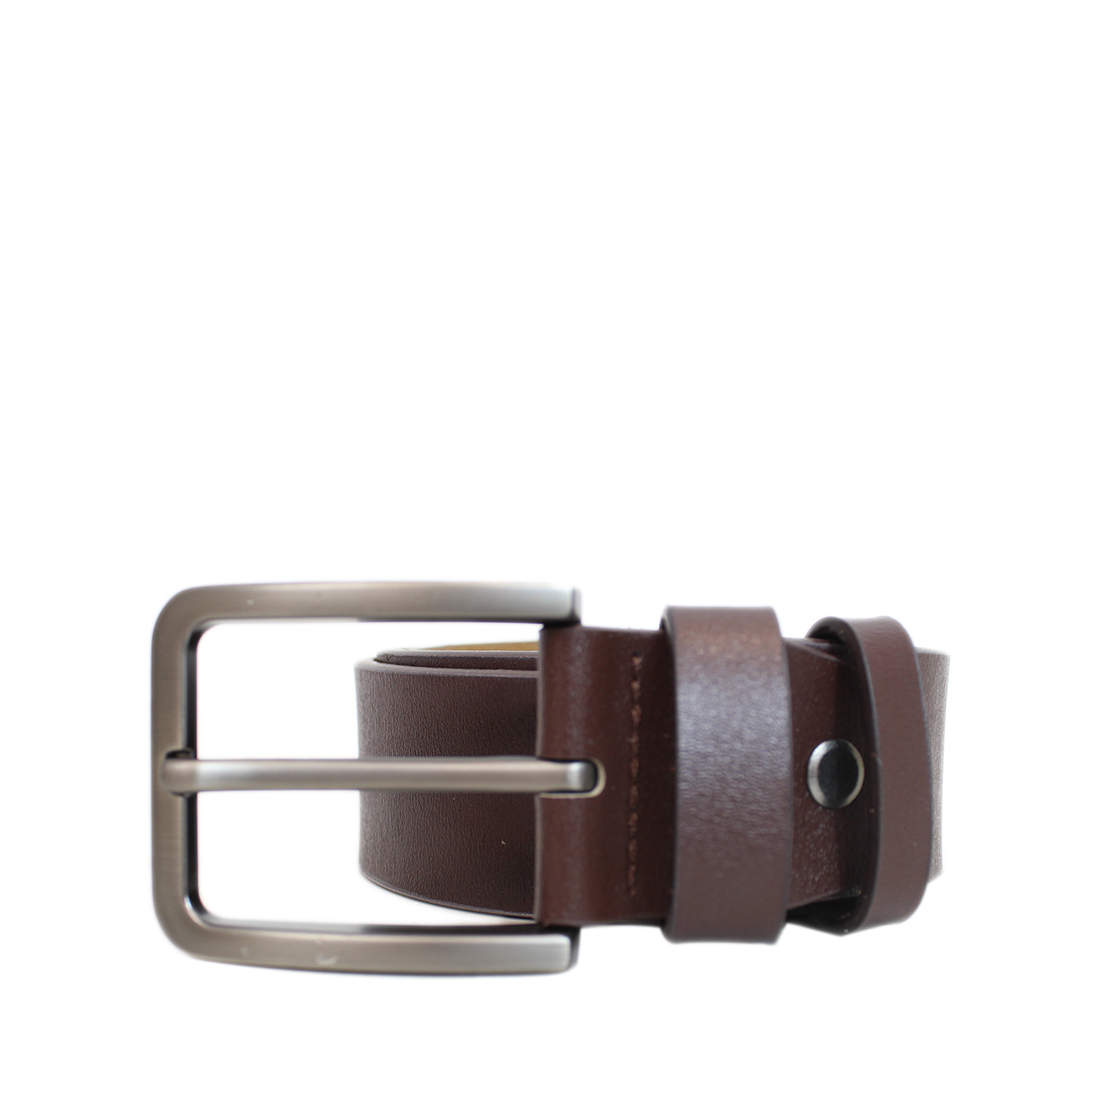 Plain with big rectangle buckle